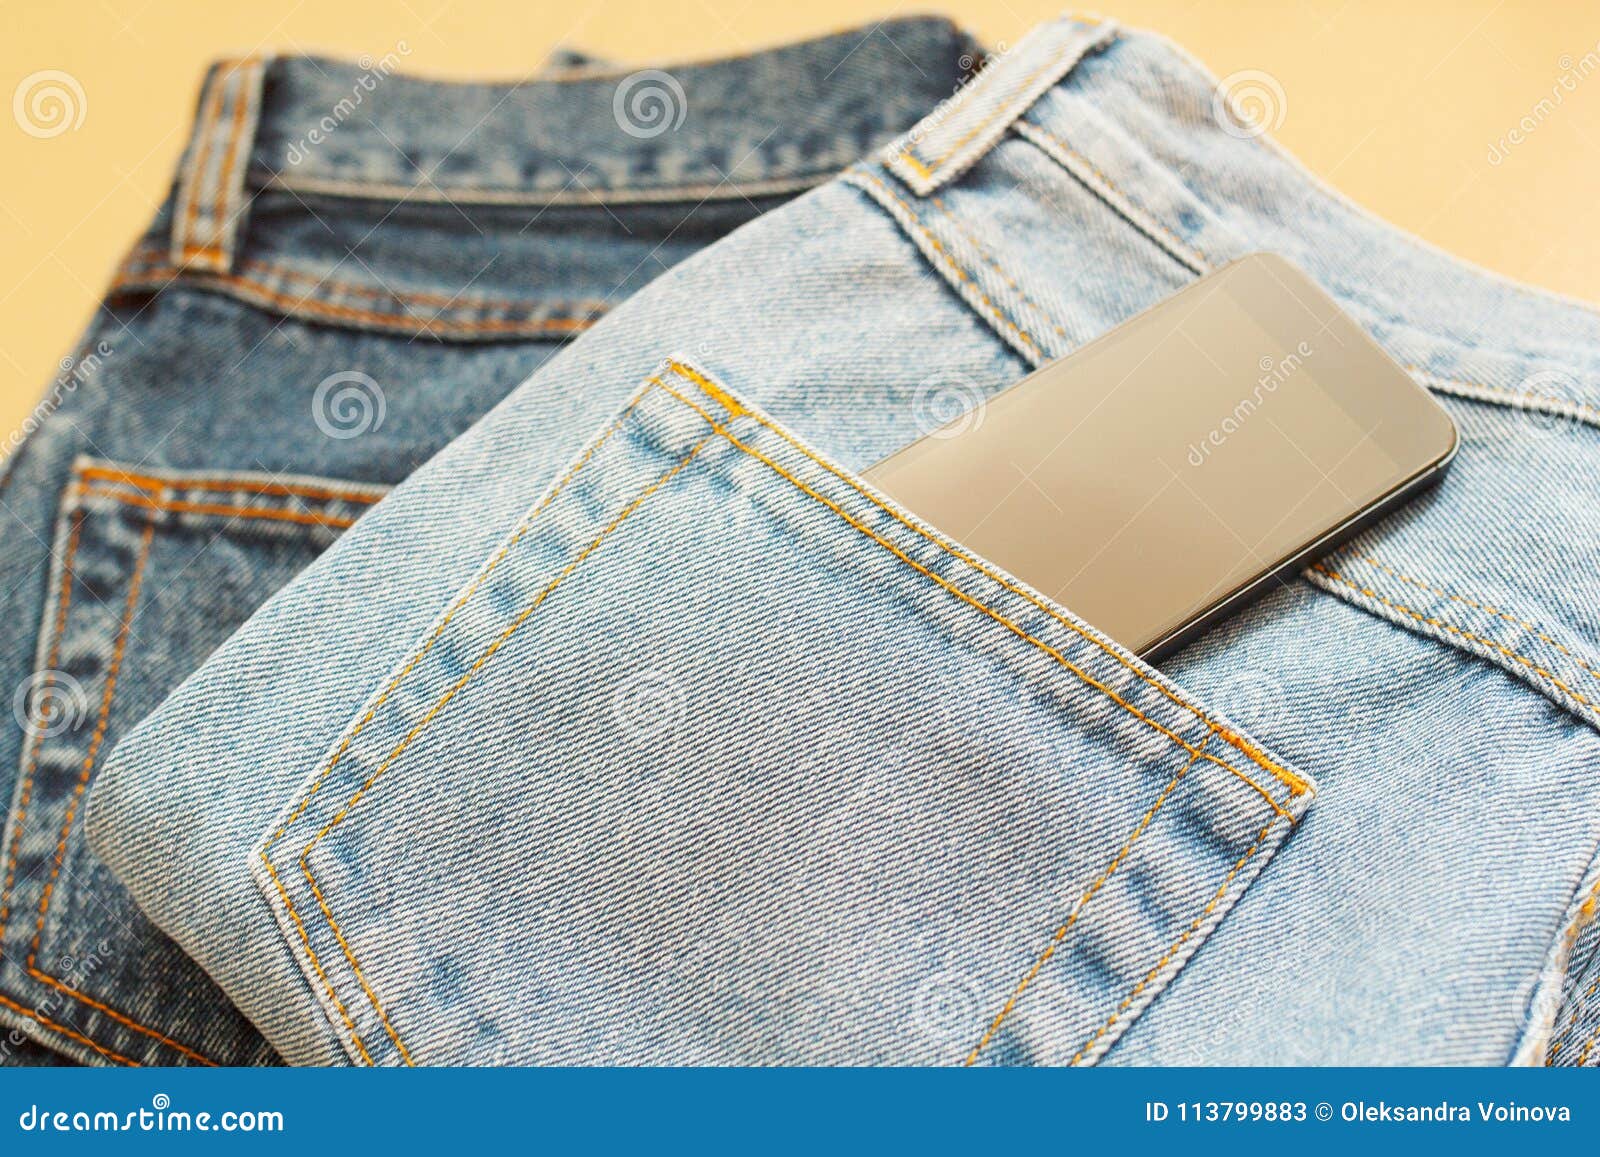 Picture of Two Jeans with Mobile in Pocket on Craft Wooden Background ...